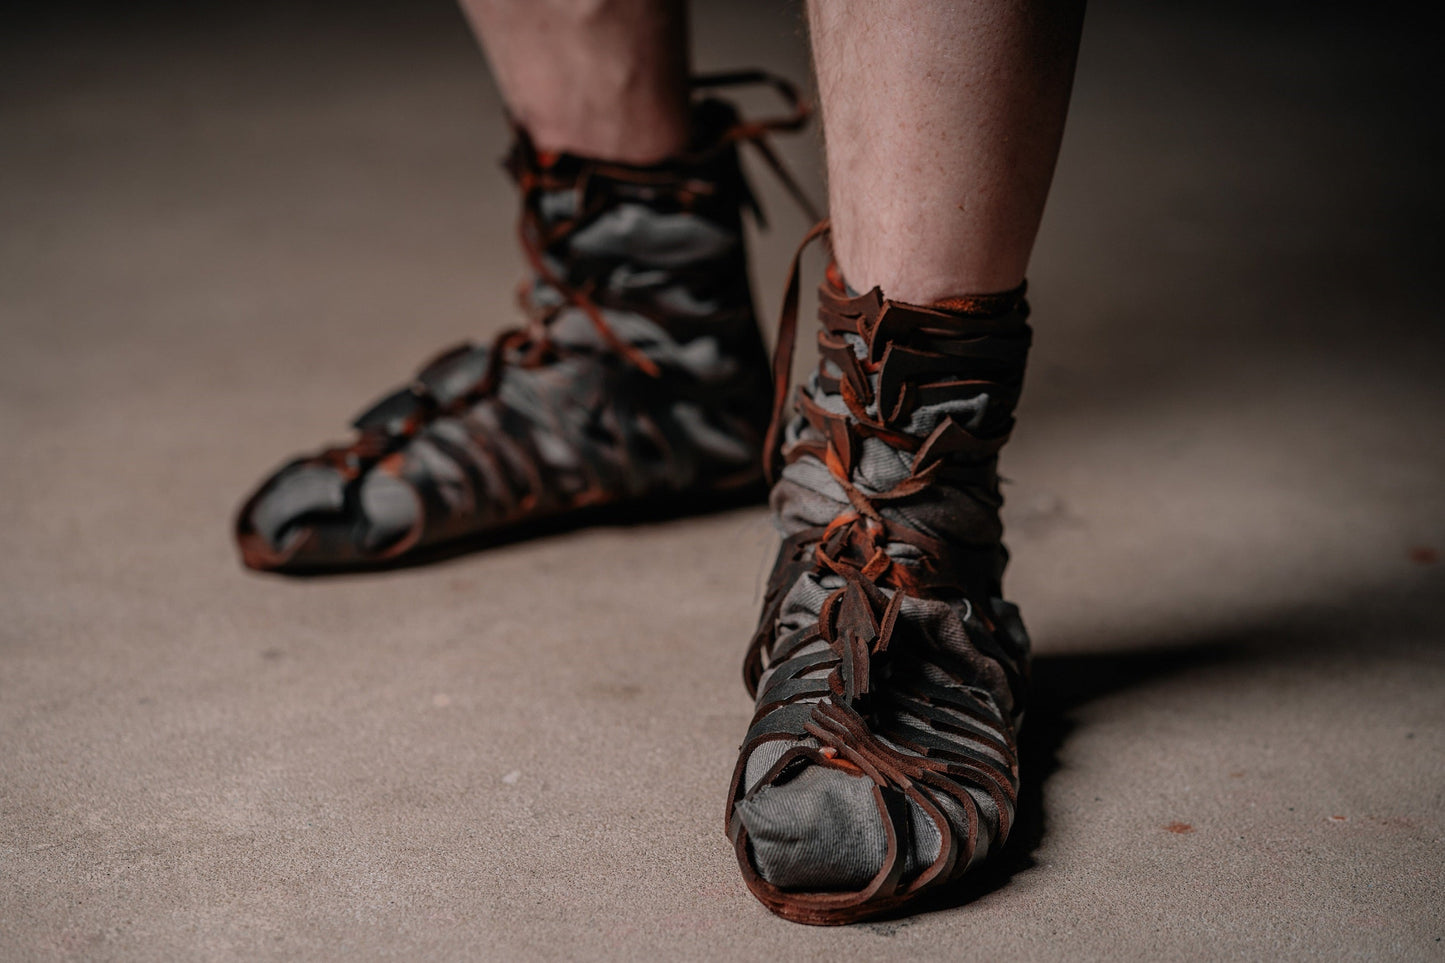 FIX SIZE of Leather Cosplay gladiator sandals